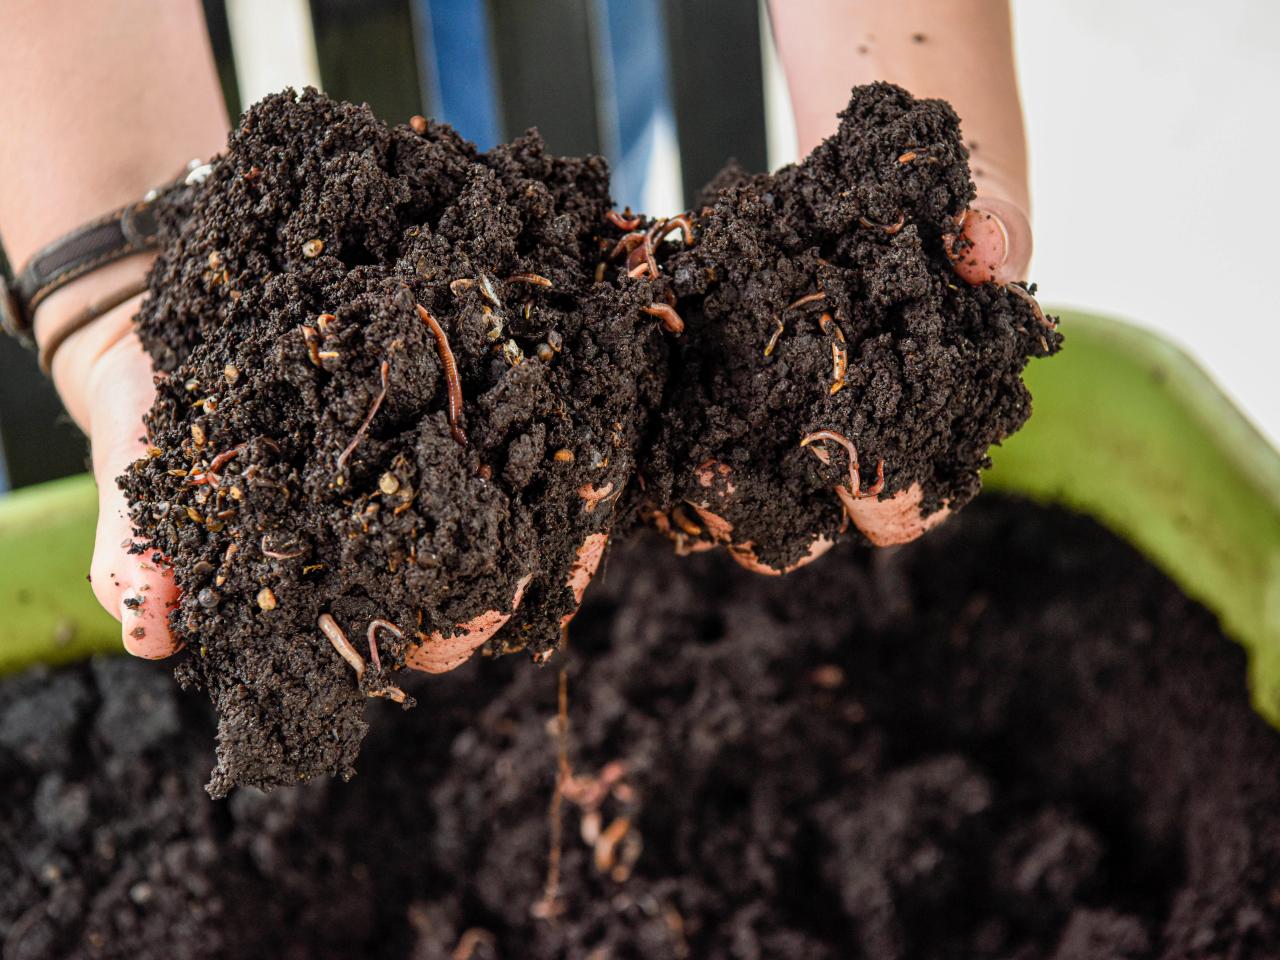 PRODUCT REVIEW: A MACHINE TO MAKE GORGEOUS COMPOST AND FREE MULCH